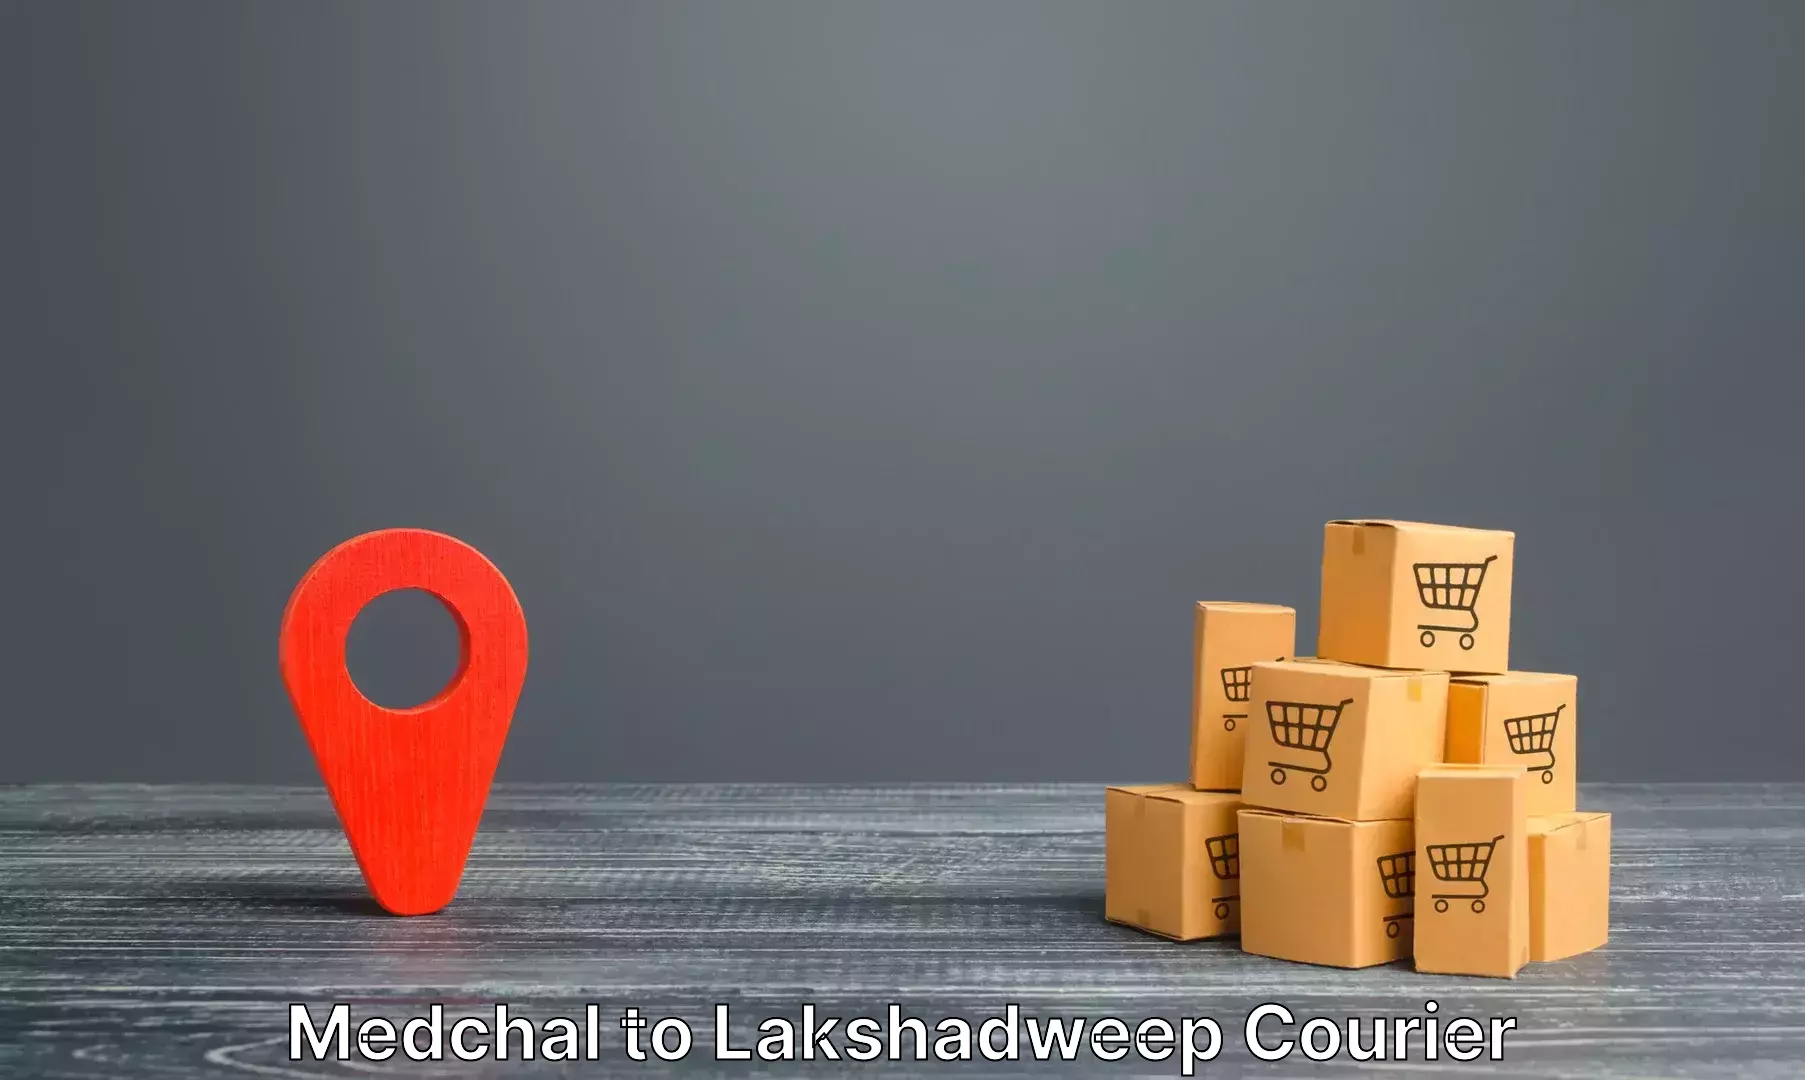 Urgent luggage shipment Medchal to Lakshadweep